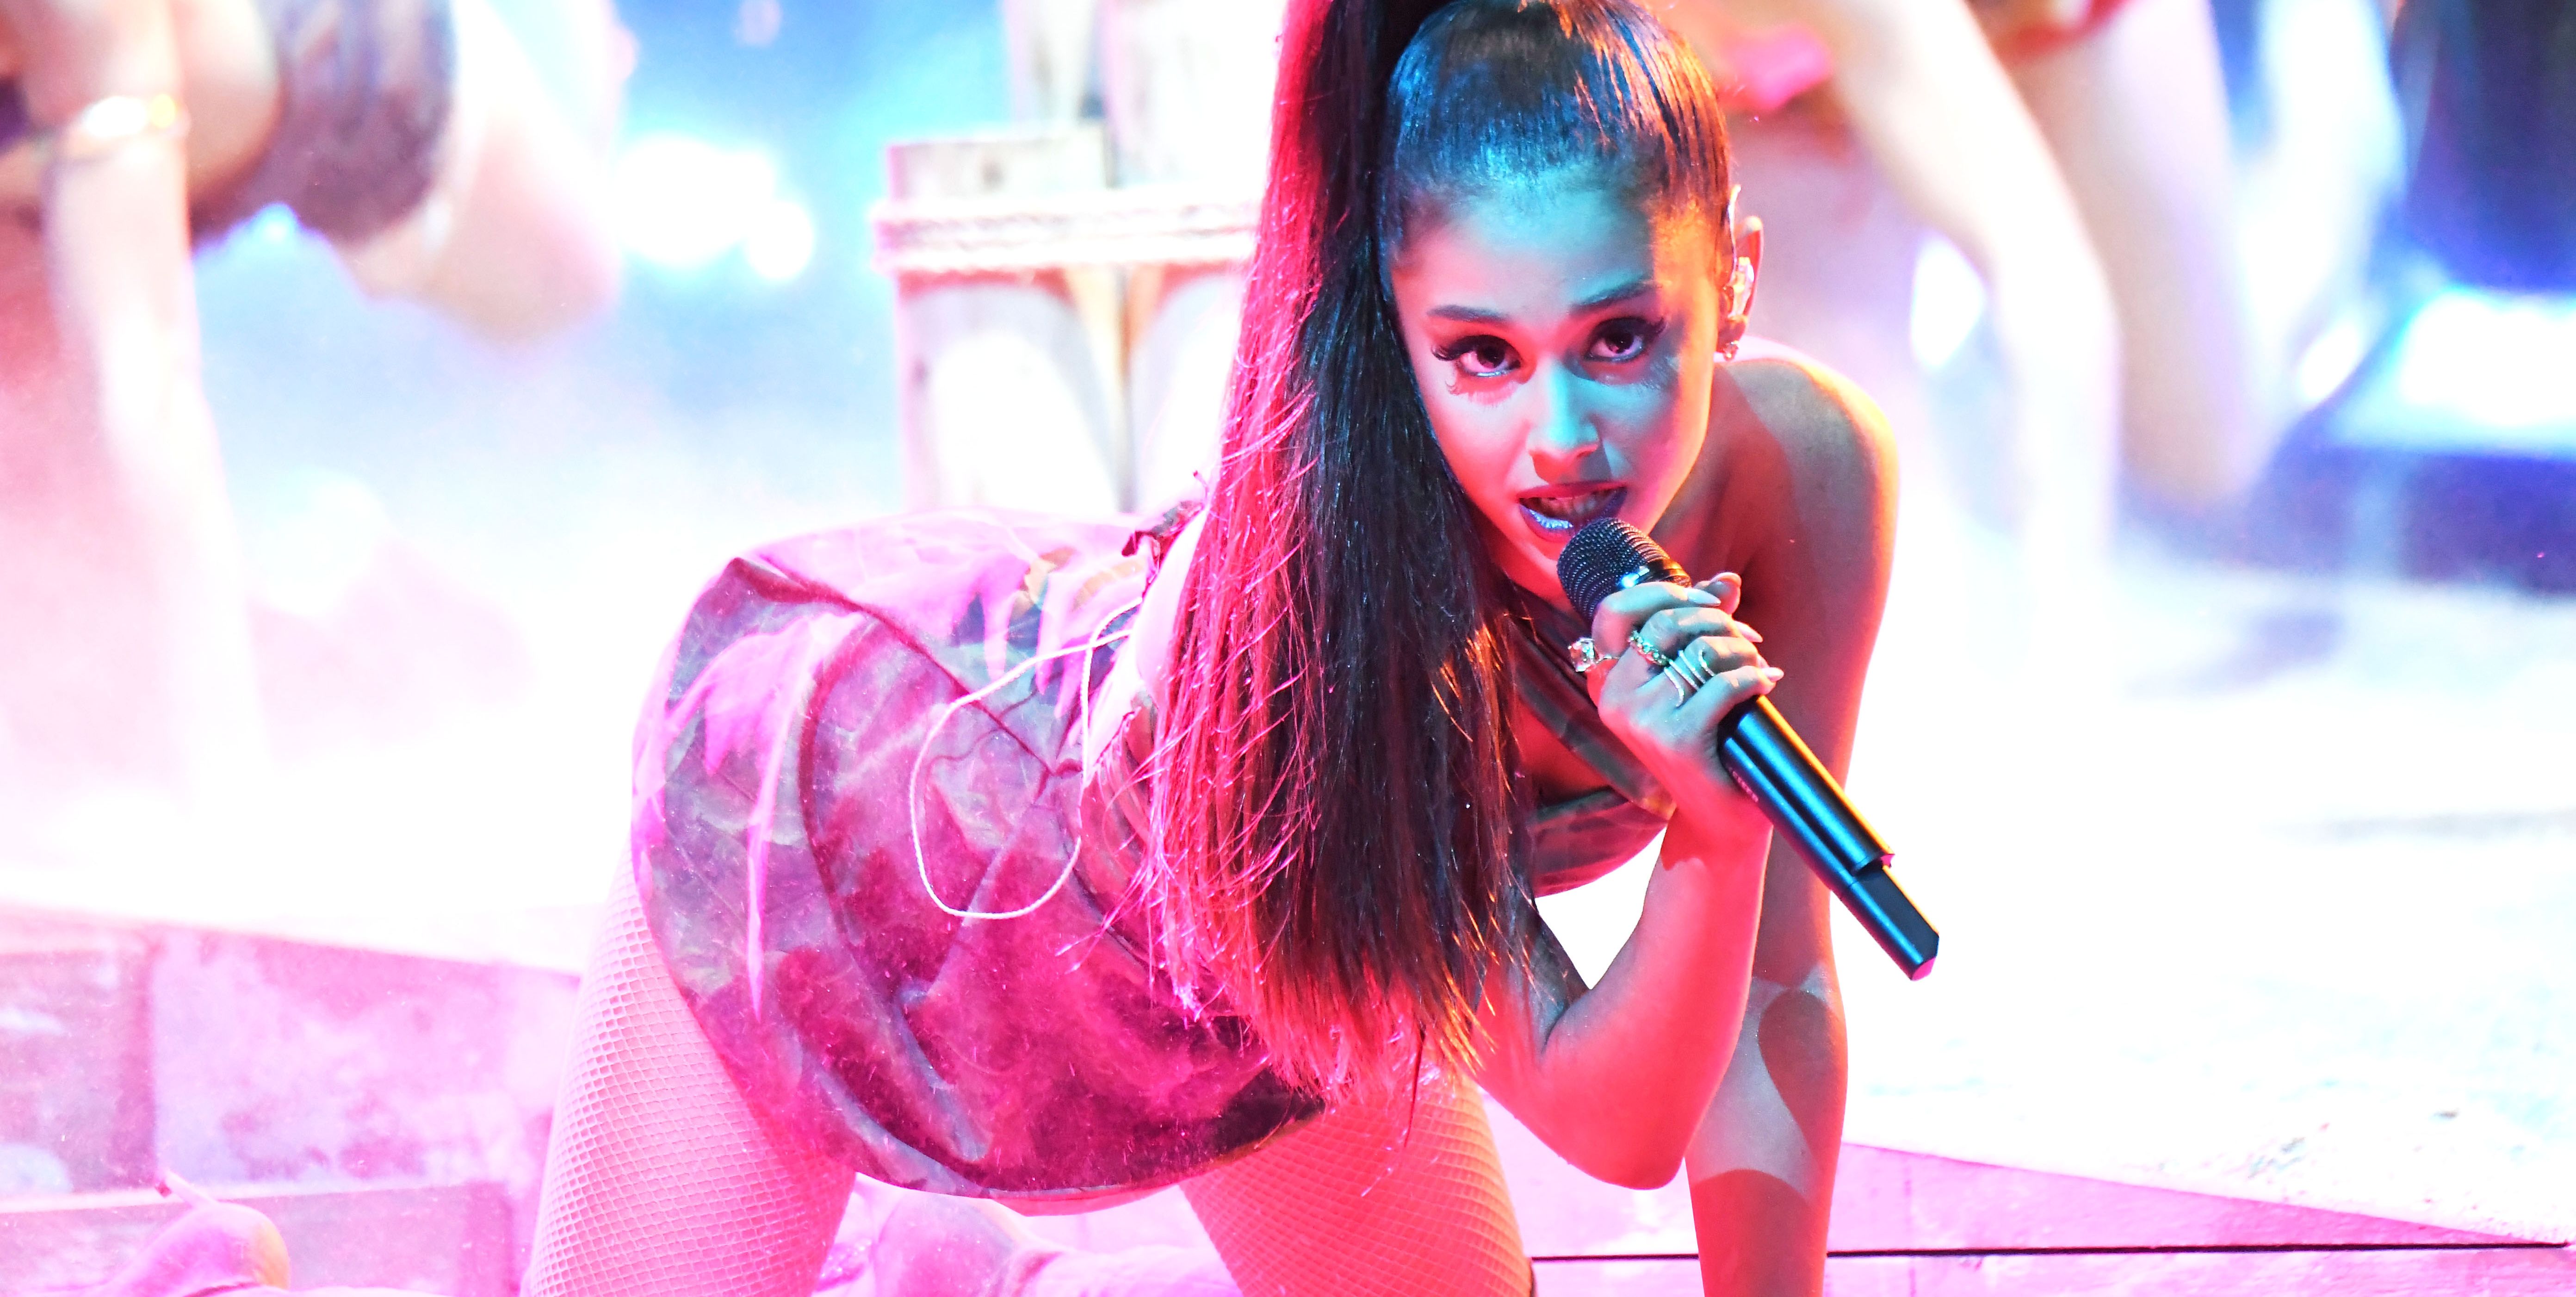 diane forestell add ariana grande bending over photo